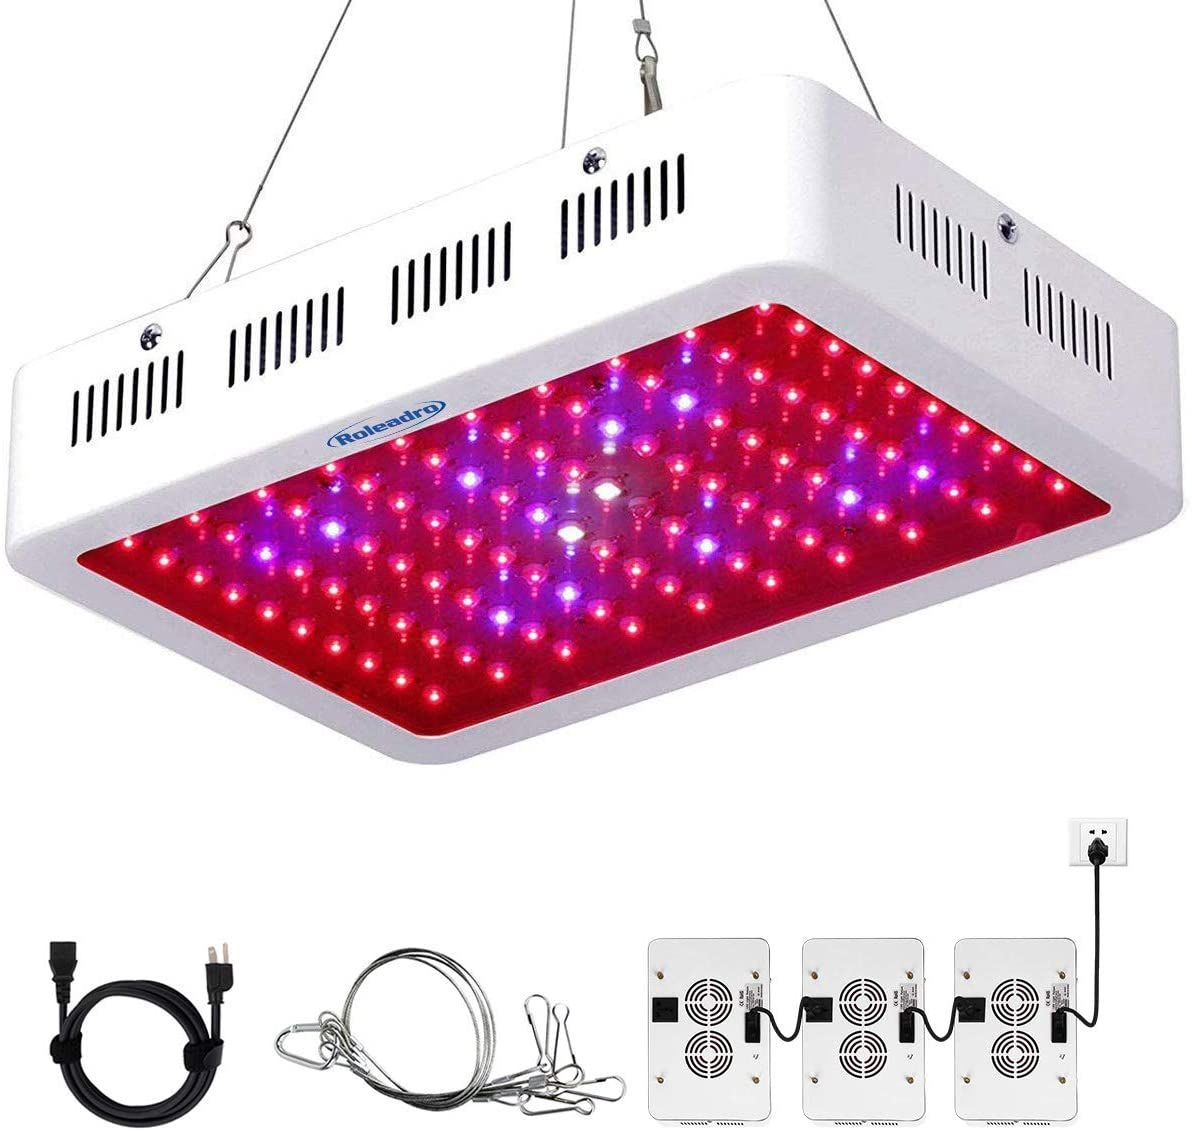 Roleadro LED Galexyhydro Series Grow Light - $$title$$